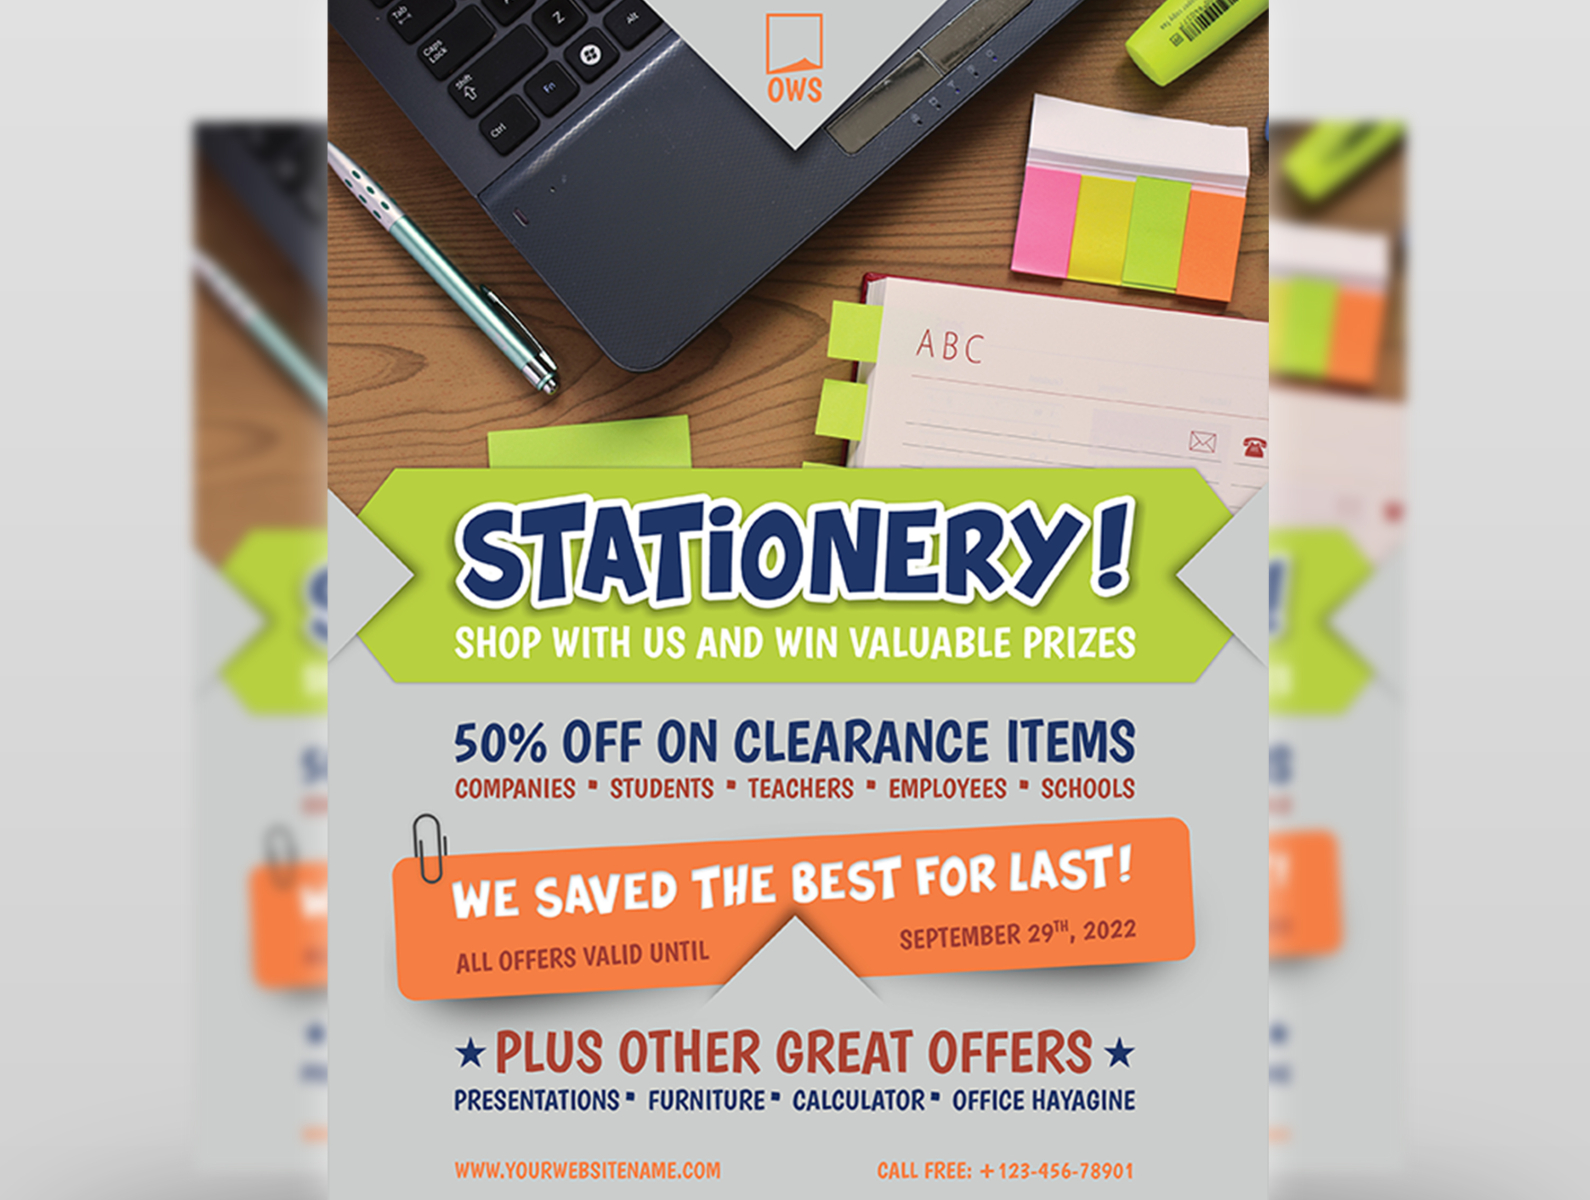 dribbble-02-stationery-products-flyer-template-jpg-by-owpictures